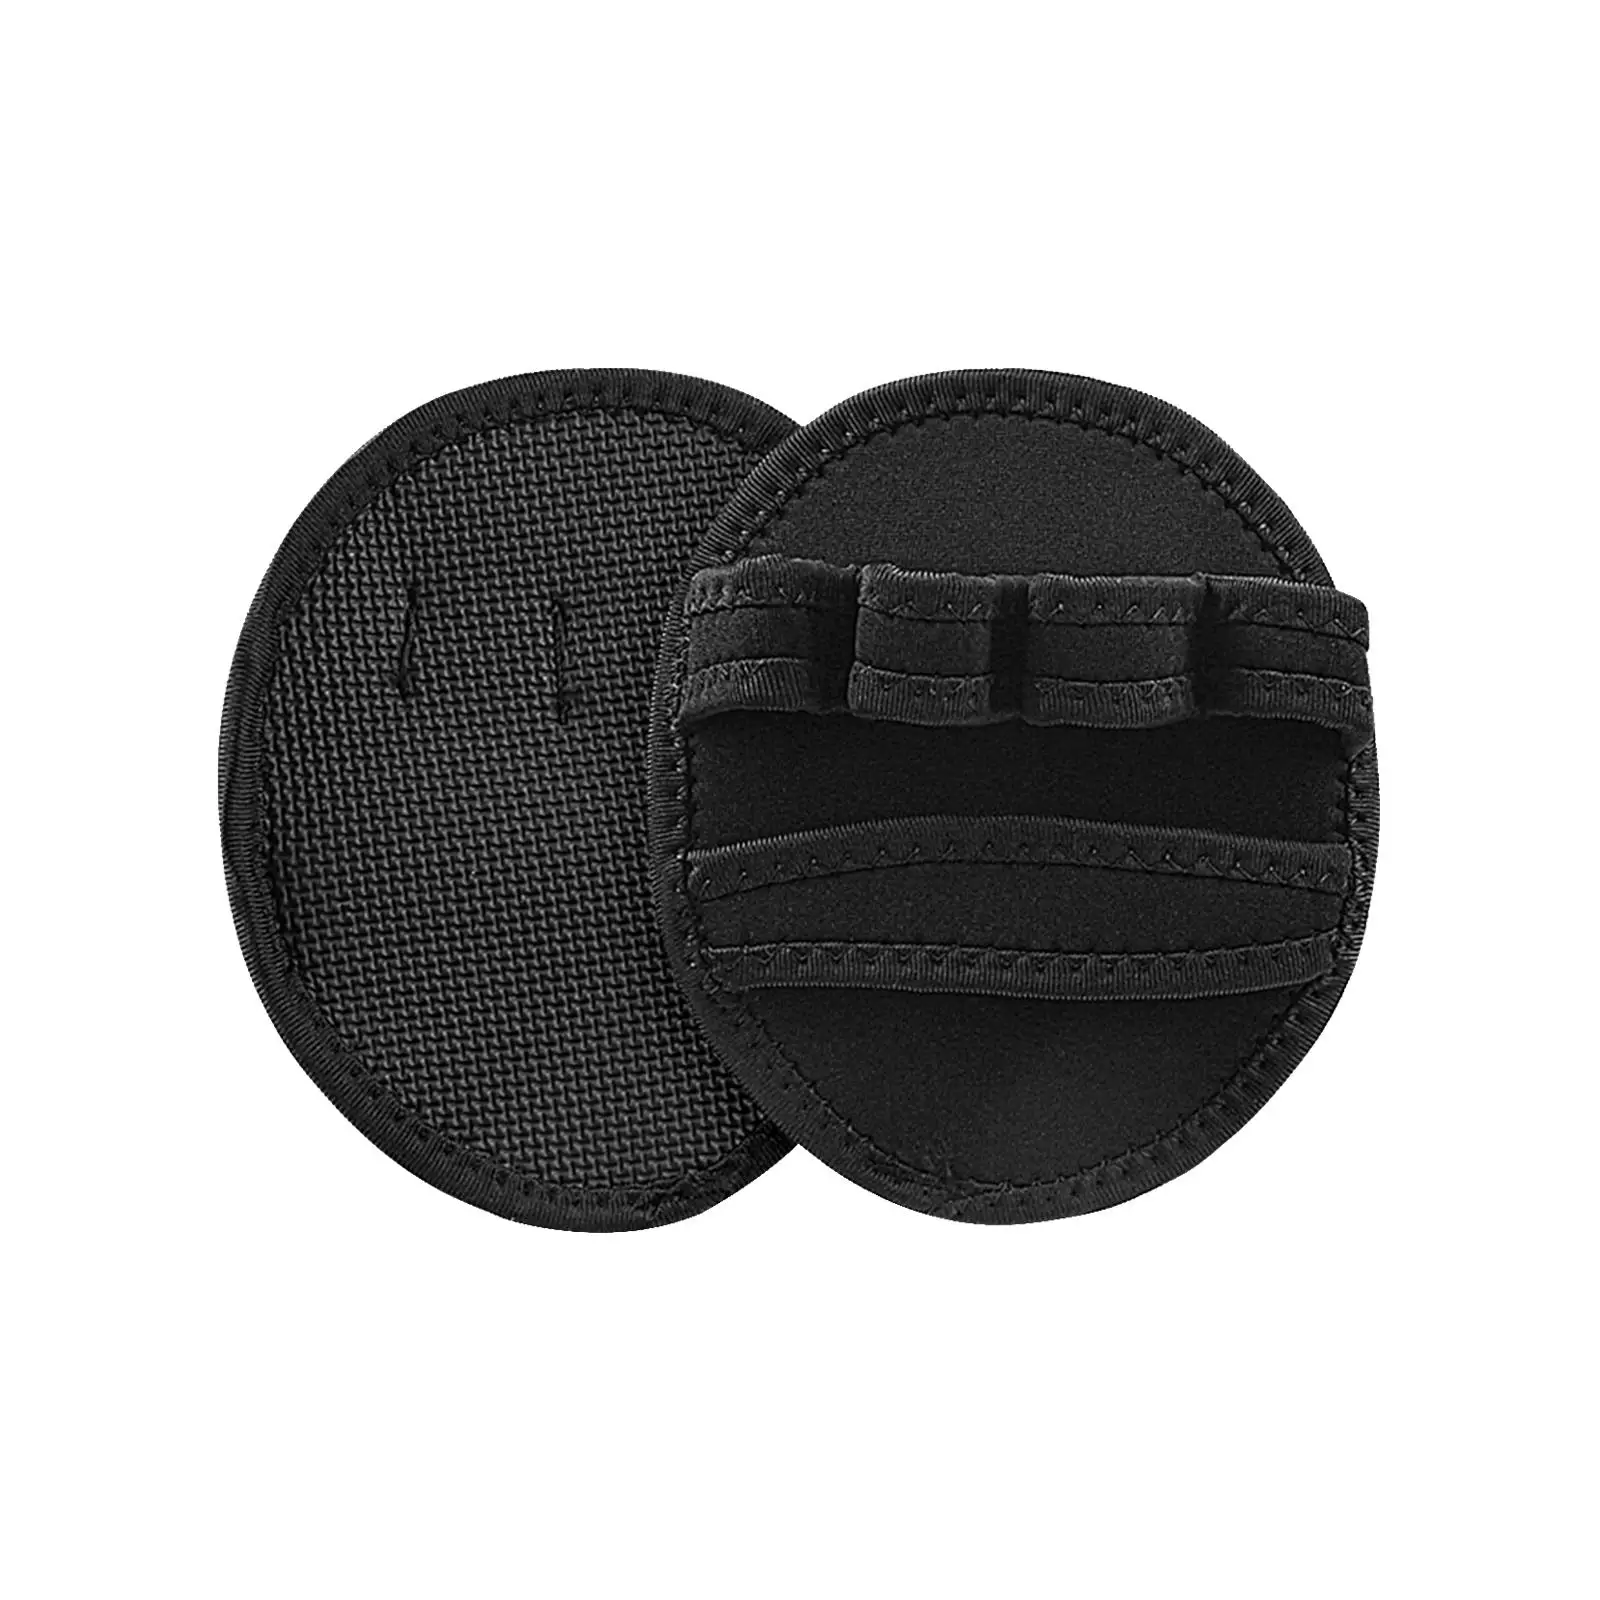 Weight Lifting Grip Pads for Men Breathable Adults Non Slip Soft Unisex Durable Lightweight Palm of Care Glove Pads for Sports